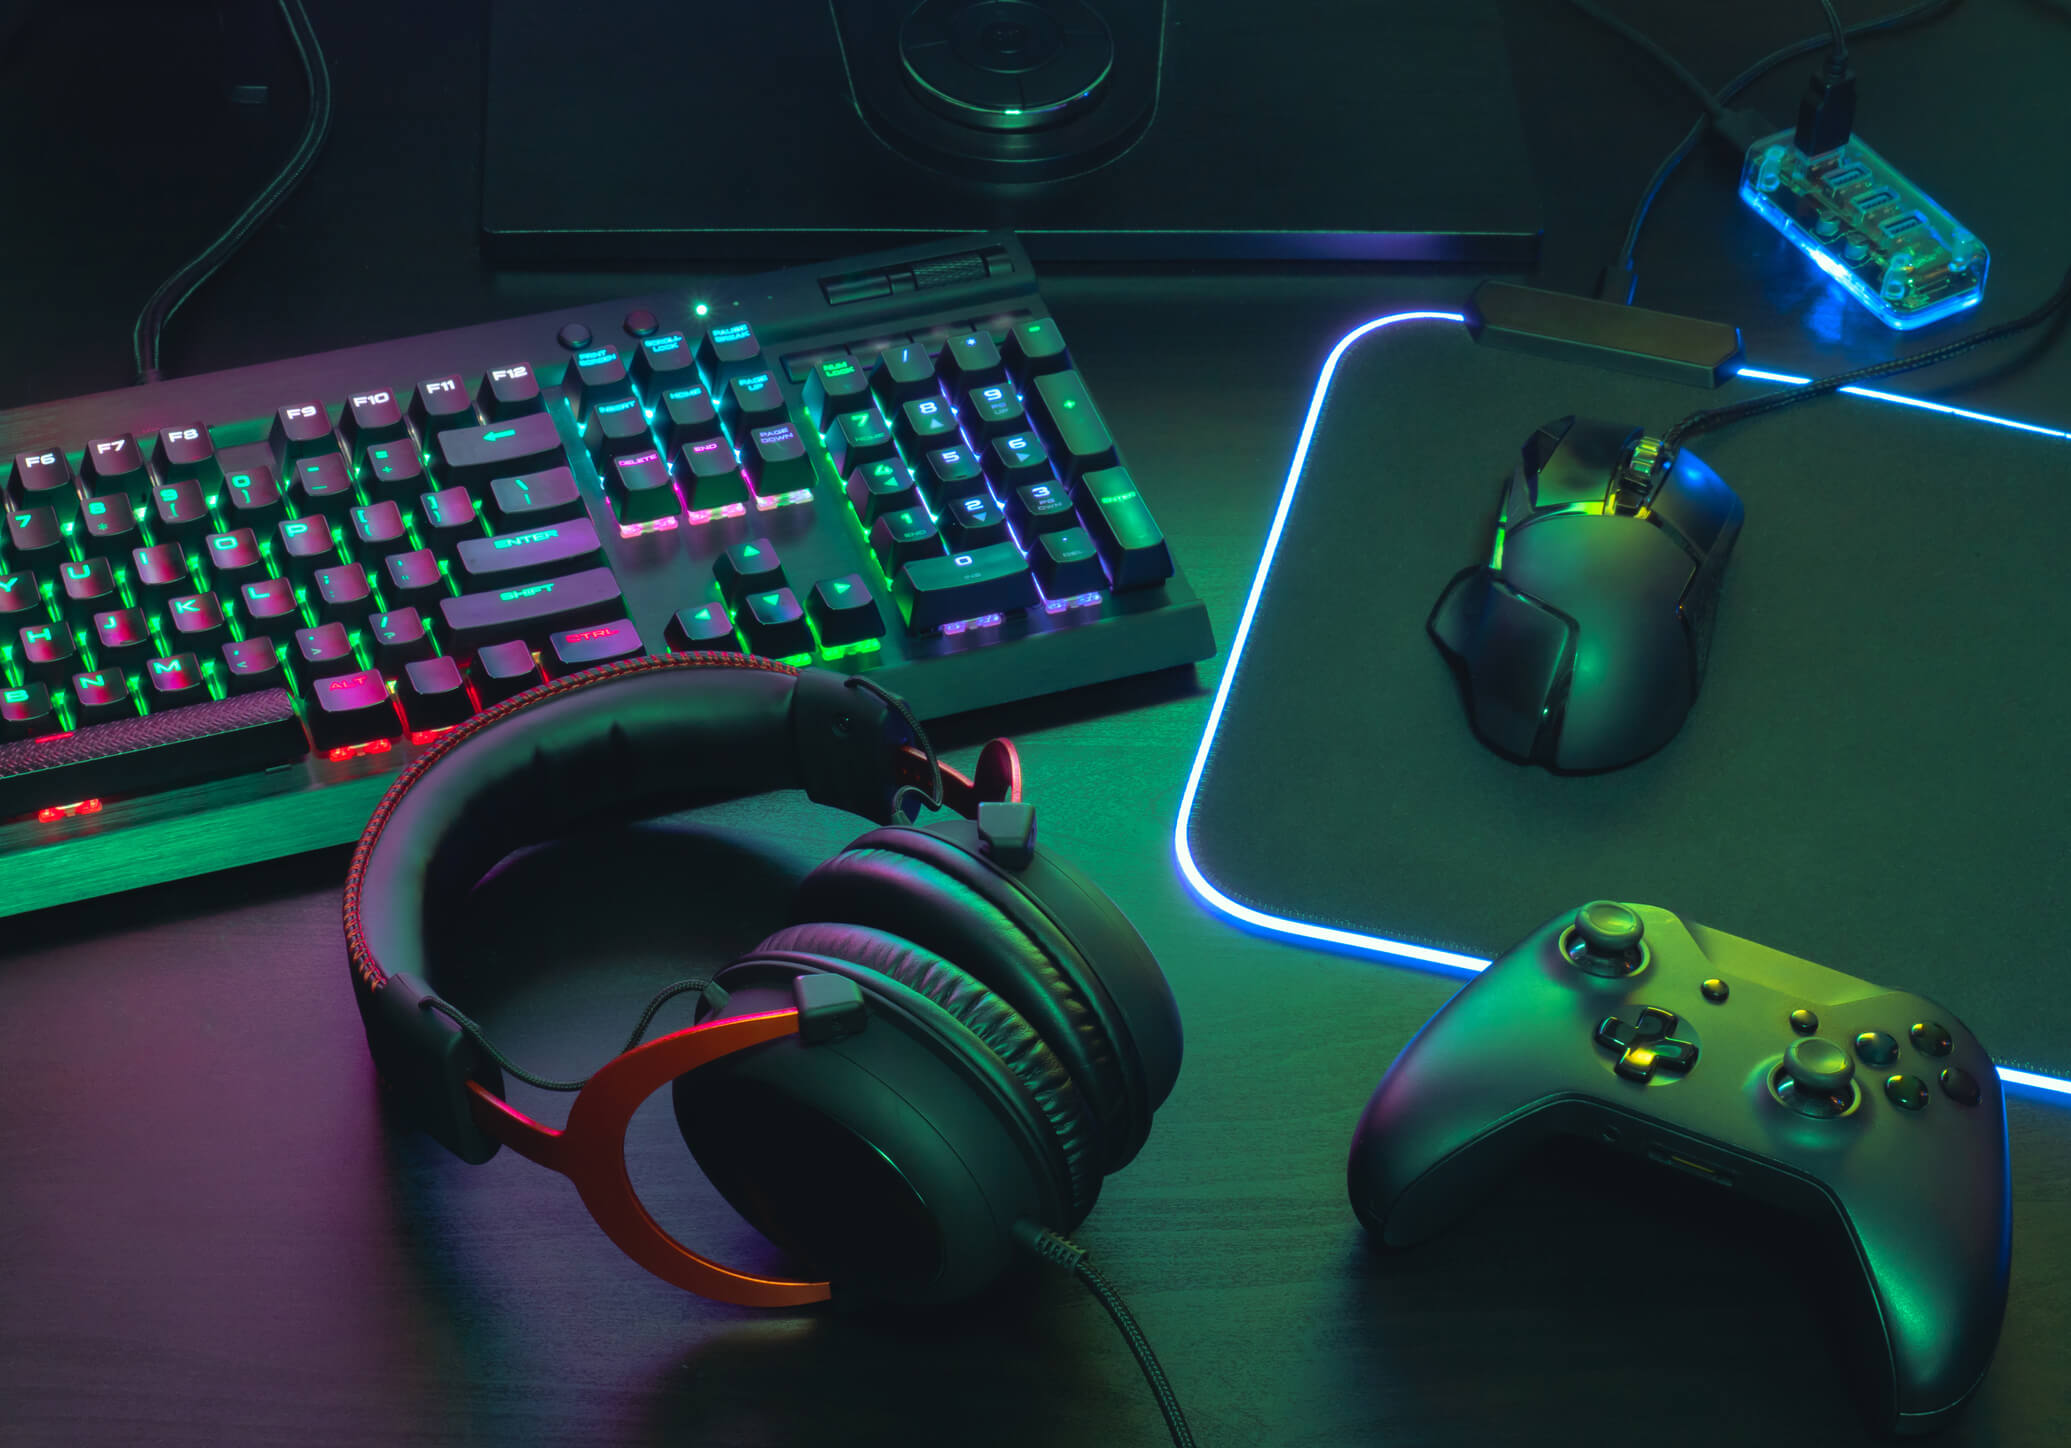 Gamer-desktop-setup-with-headphones-mouse-controller-and-RGB-keyboard-and-mousepad